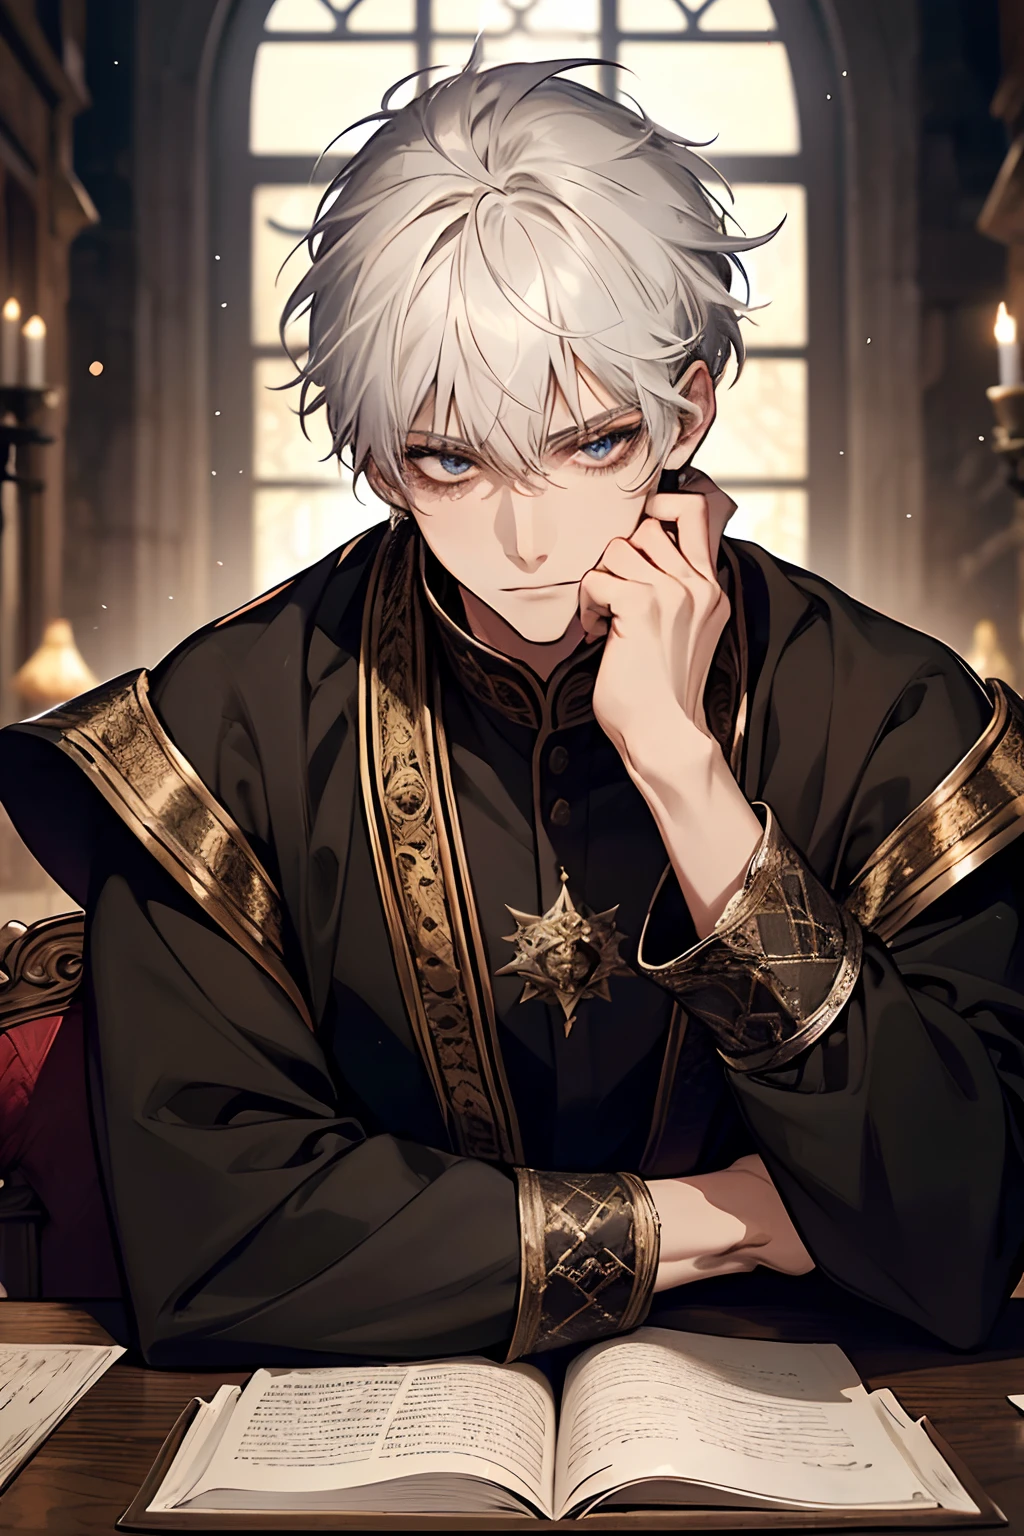 1male, calm, adult, age 35 face, short messy hair with bangs, white hair, royalty, prince, wears black clothing, in a castle, adult face, two hands, sitting at a table with a book, medieval times, close up,  calm